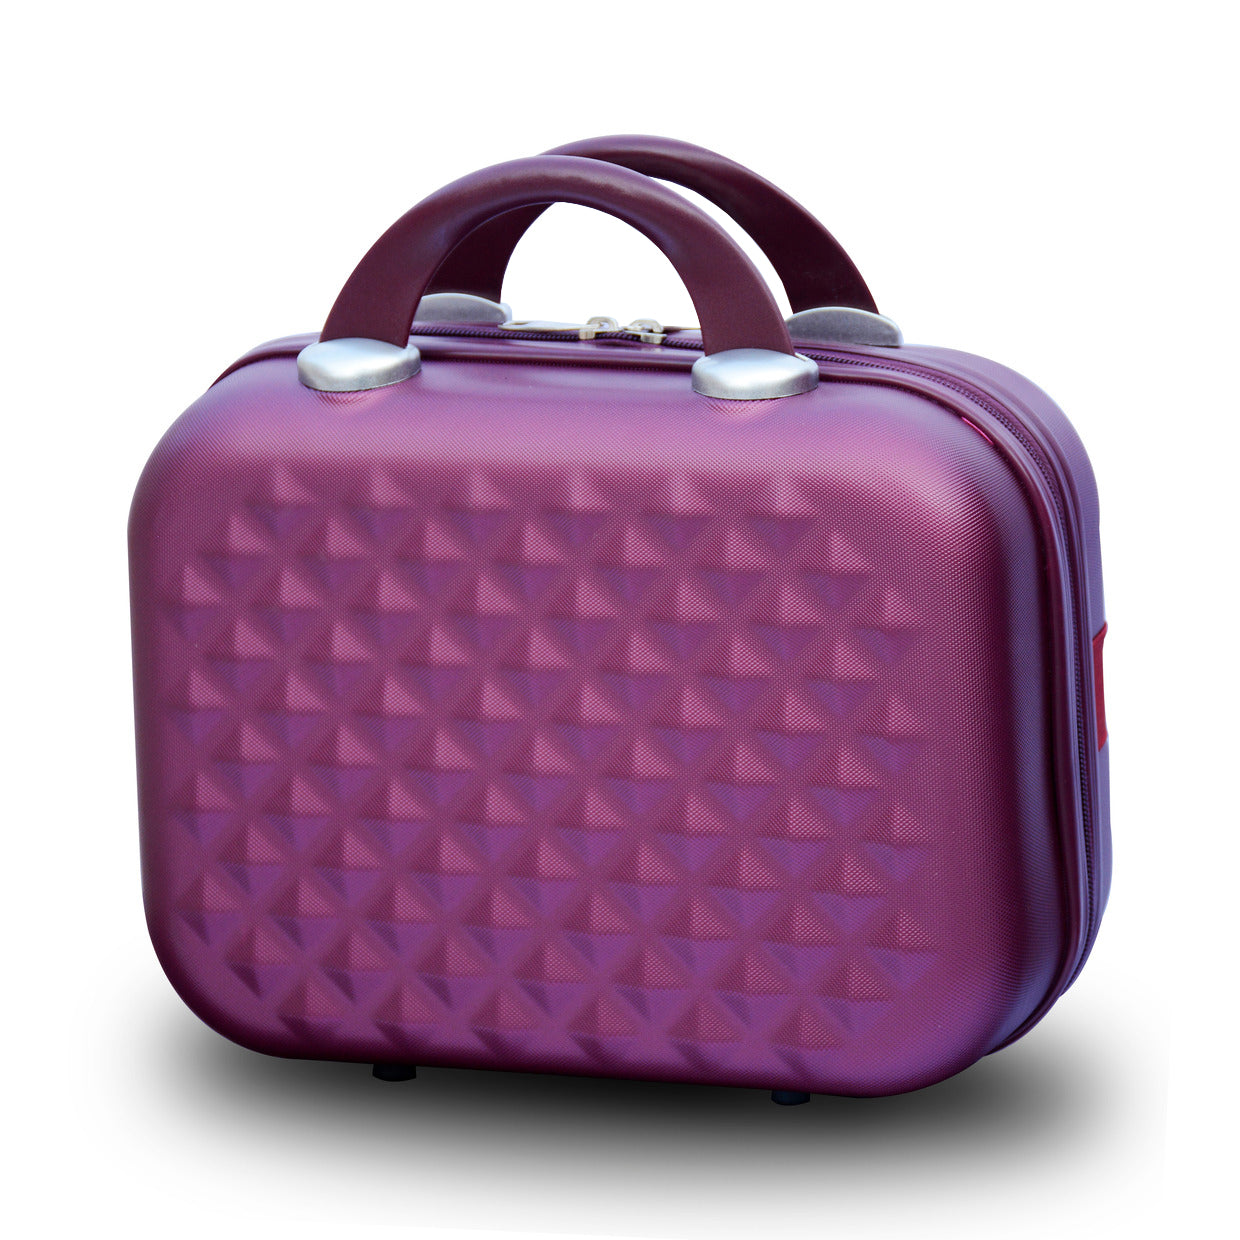 4 Piece Full Set 7" 20" 24" 28 Inches Maroon Colour Diamond Cut ABS Lightweight Beauty Case Zaappy.com